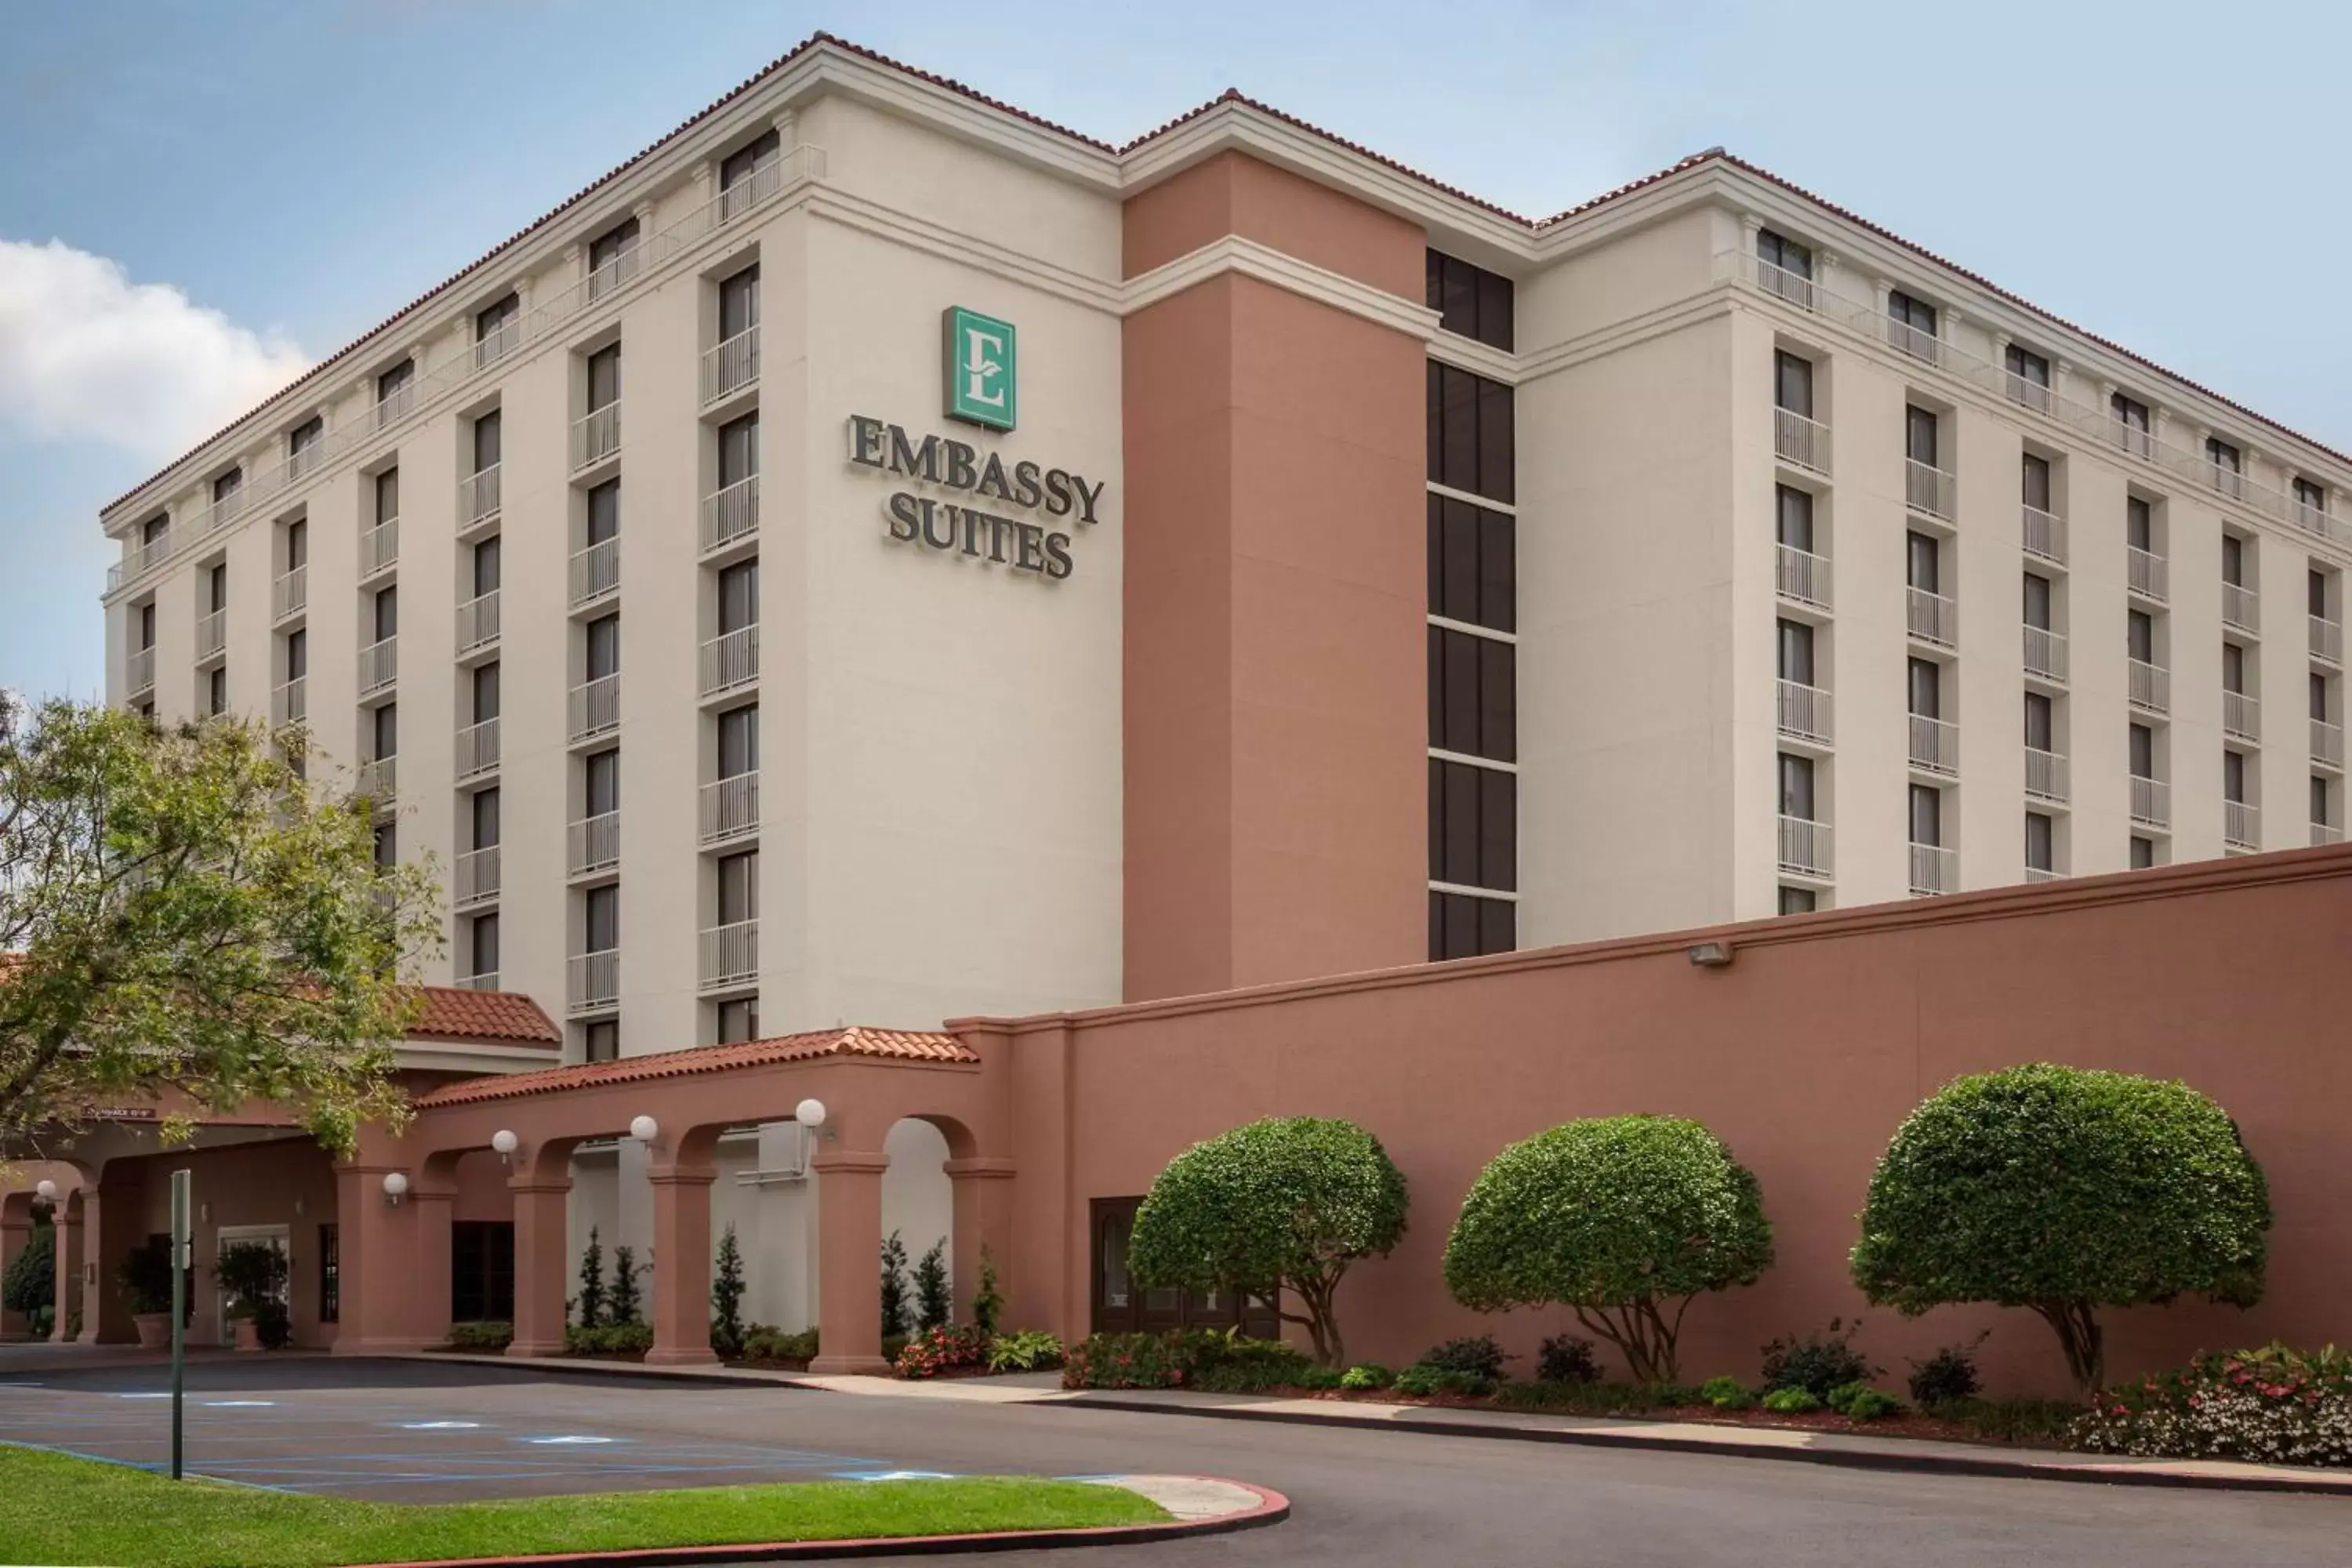 Property Building in Embassy Suites Baton Rouge